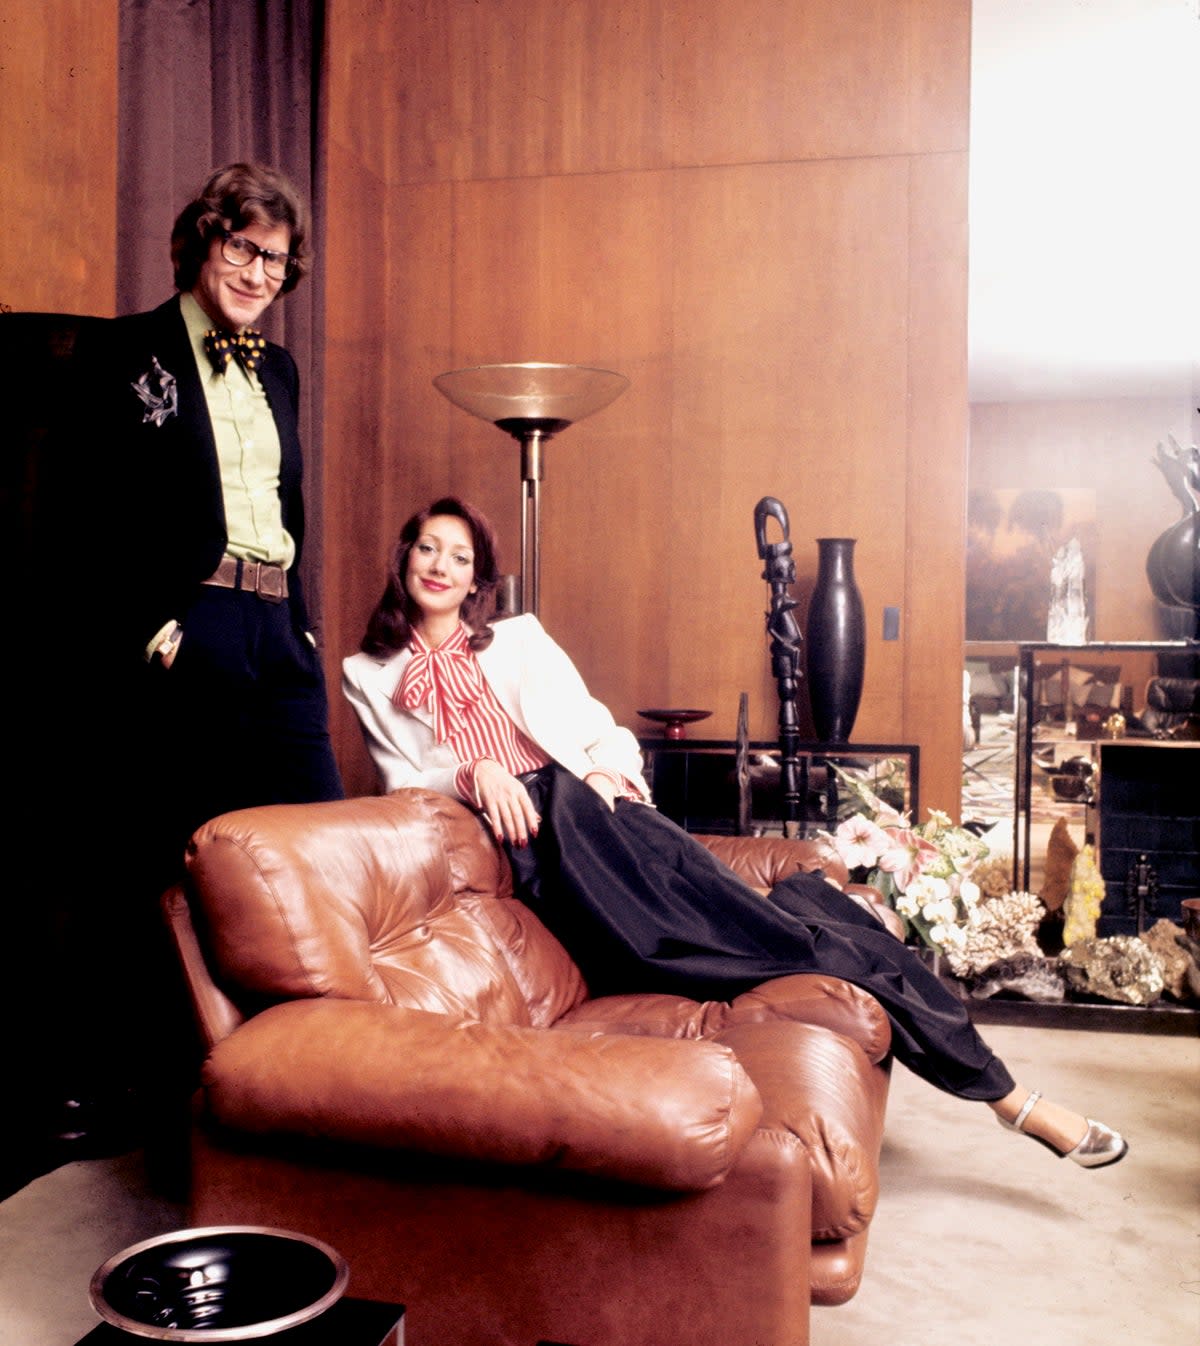 Yves Saint Laurent at his house in Paris with Marisa Berenson - Getty Images (Paris Match via Getty Images)